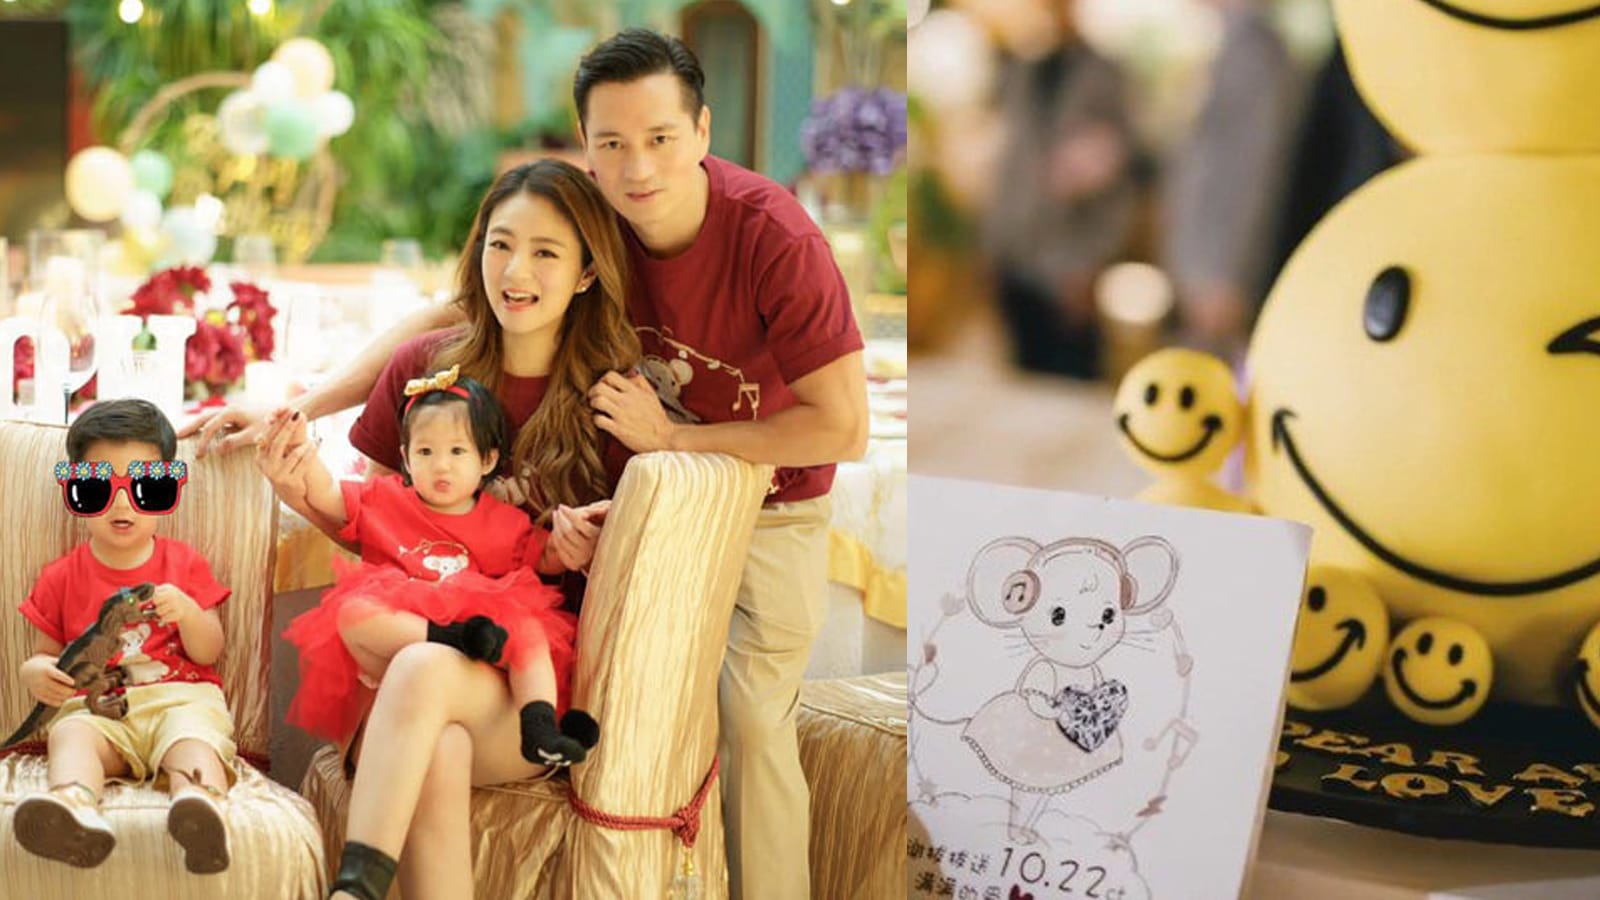 Ady An’s Tycoon Husband Gave Their Daughter A 10-Carat Diamond For Her 1st Birthday